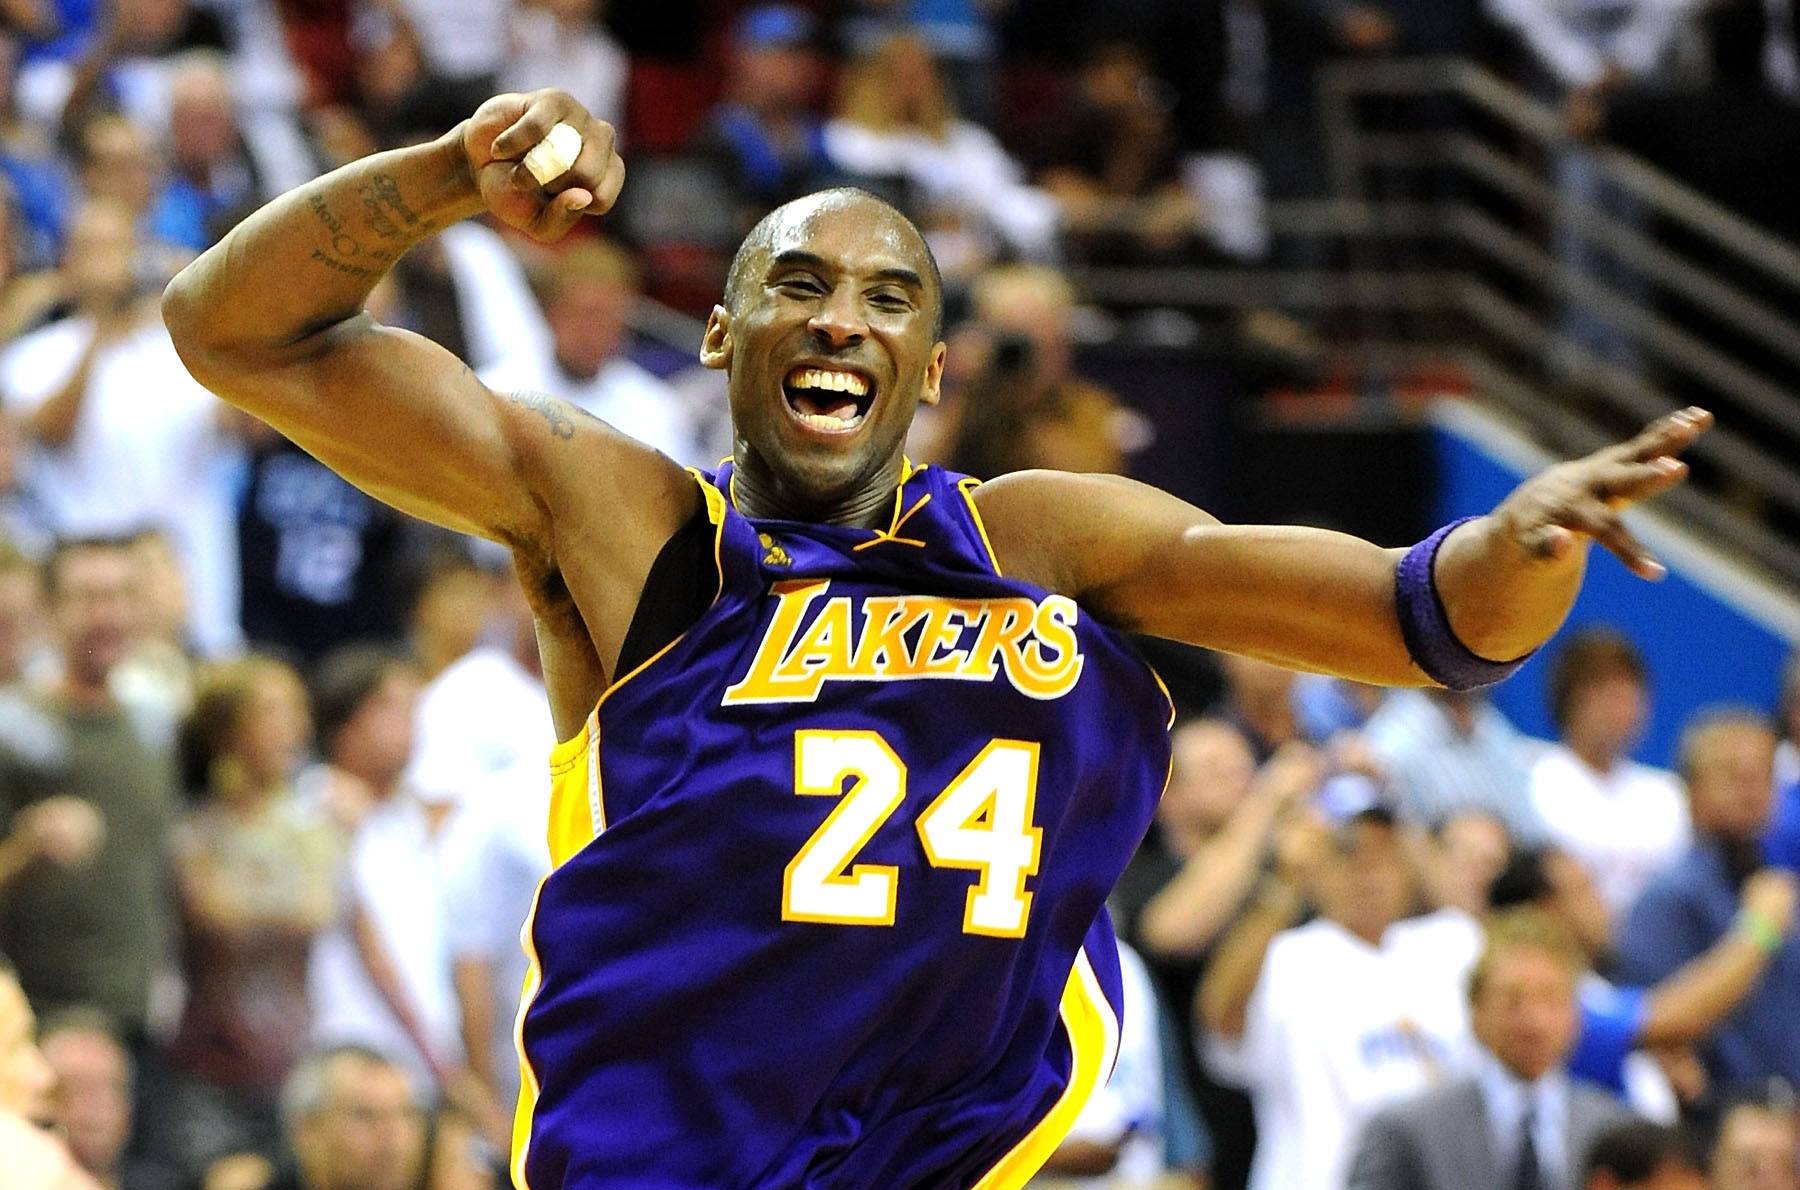 Salute the Legend - After 20 years of playing in the NBA, Kobe Bryant recently announced that he will hang up his jersey at the end of the 2015-2016 season. He's not leaving empty-handed. The Lakers shooting guard has five NBA championship rings, is a 17-time All-Star, has led the league in scoring twice and will be setting an NBA record for most seasons with the same team. Although his life is primarily dedicated to basketball, he's considered an icon in pop culture. Along with his athletic legacy, Kobe's personal life — from his almost-divorce to the 2003 sexual assault allegation — has been well documented in rap punchlines. We will be saying goodbye to the Black Mamba, but Kobe's influence lives through this list of 15 rap references. — Janice Llamoca (Photo: Ronald Martinez/Getty Images)